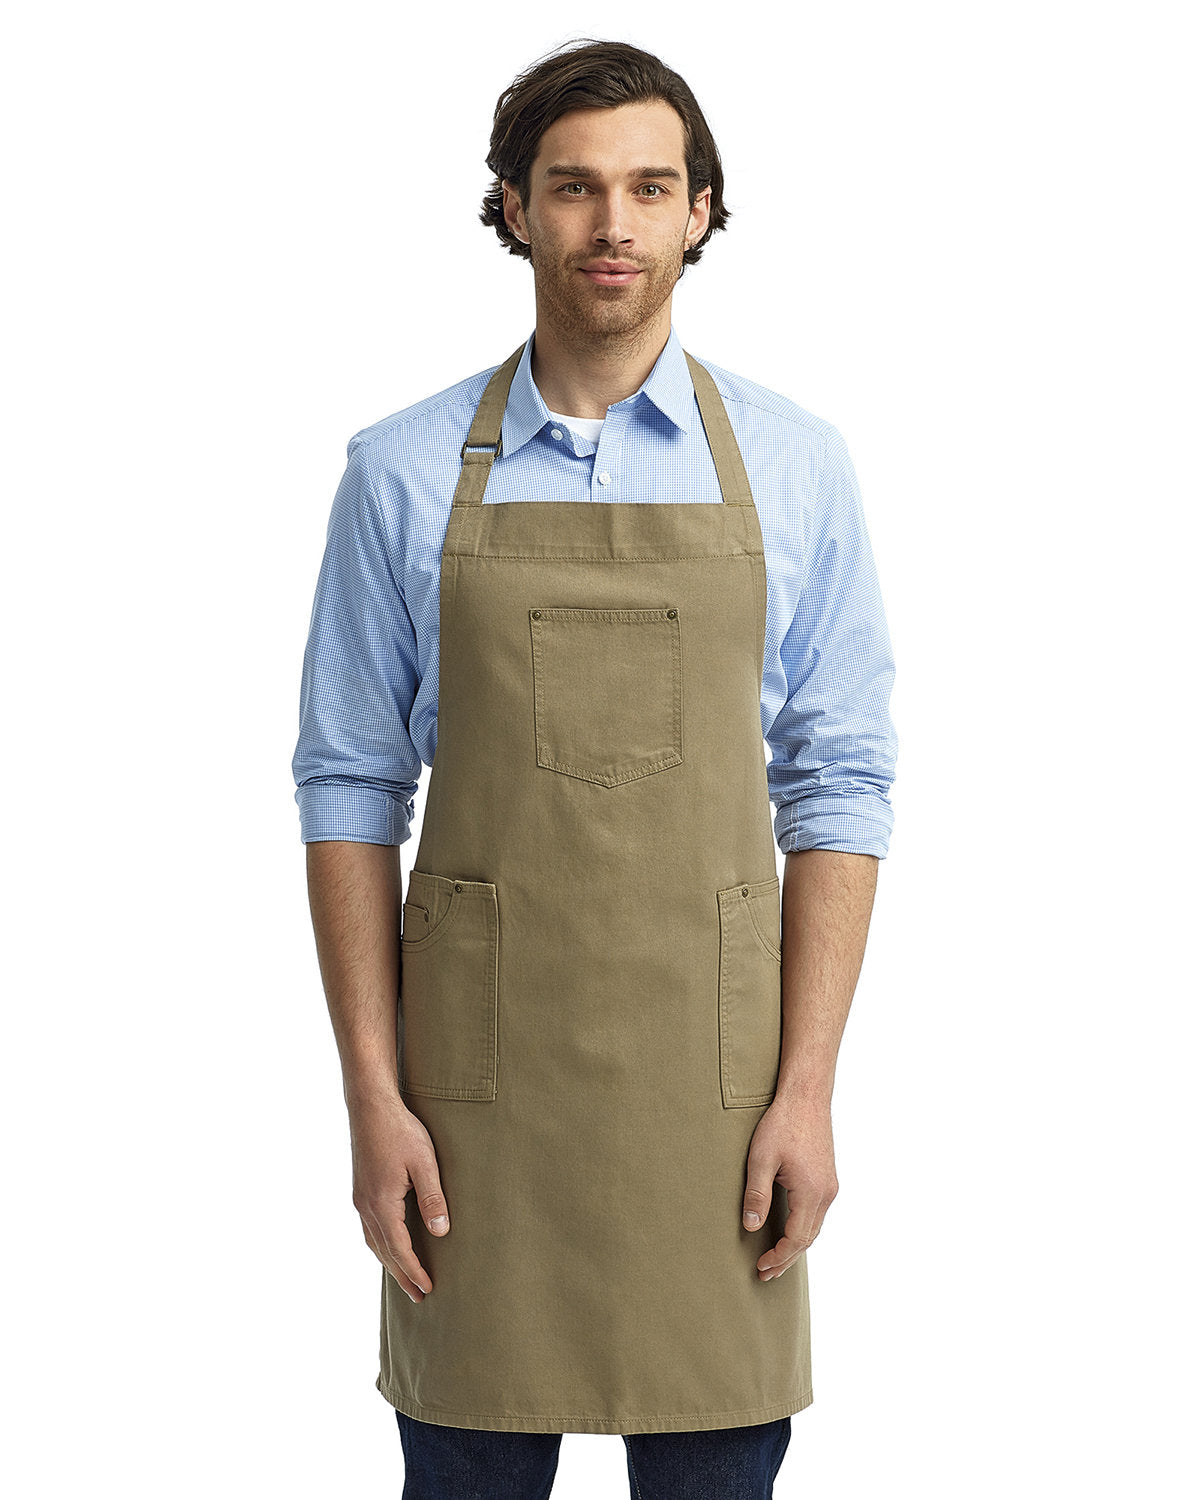 Artisan Elegance: The Unisex Cotton Chino Bib Apron from the Artisan Collection by Reprime